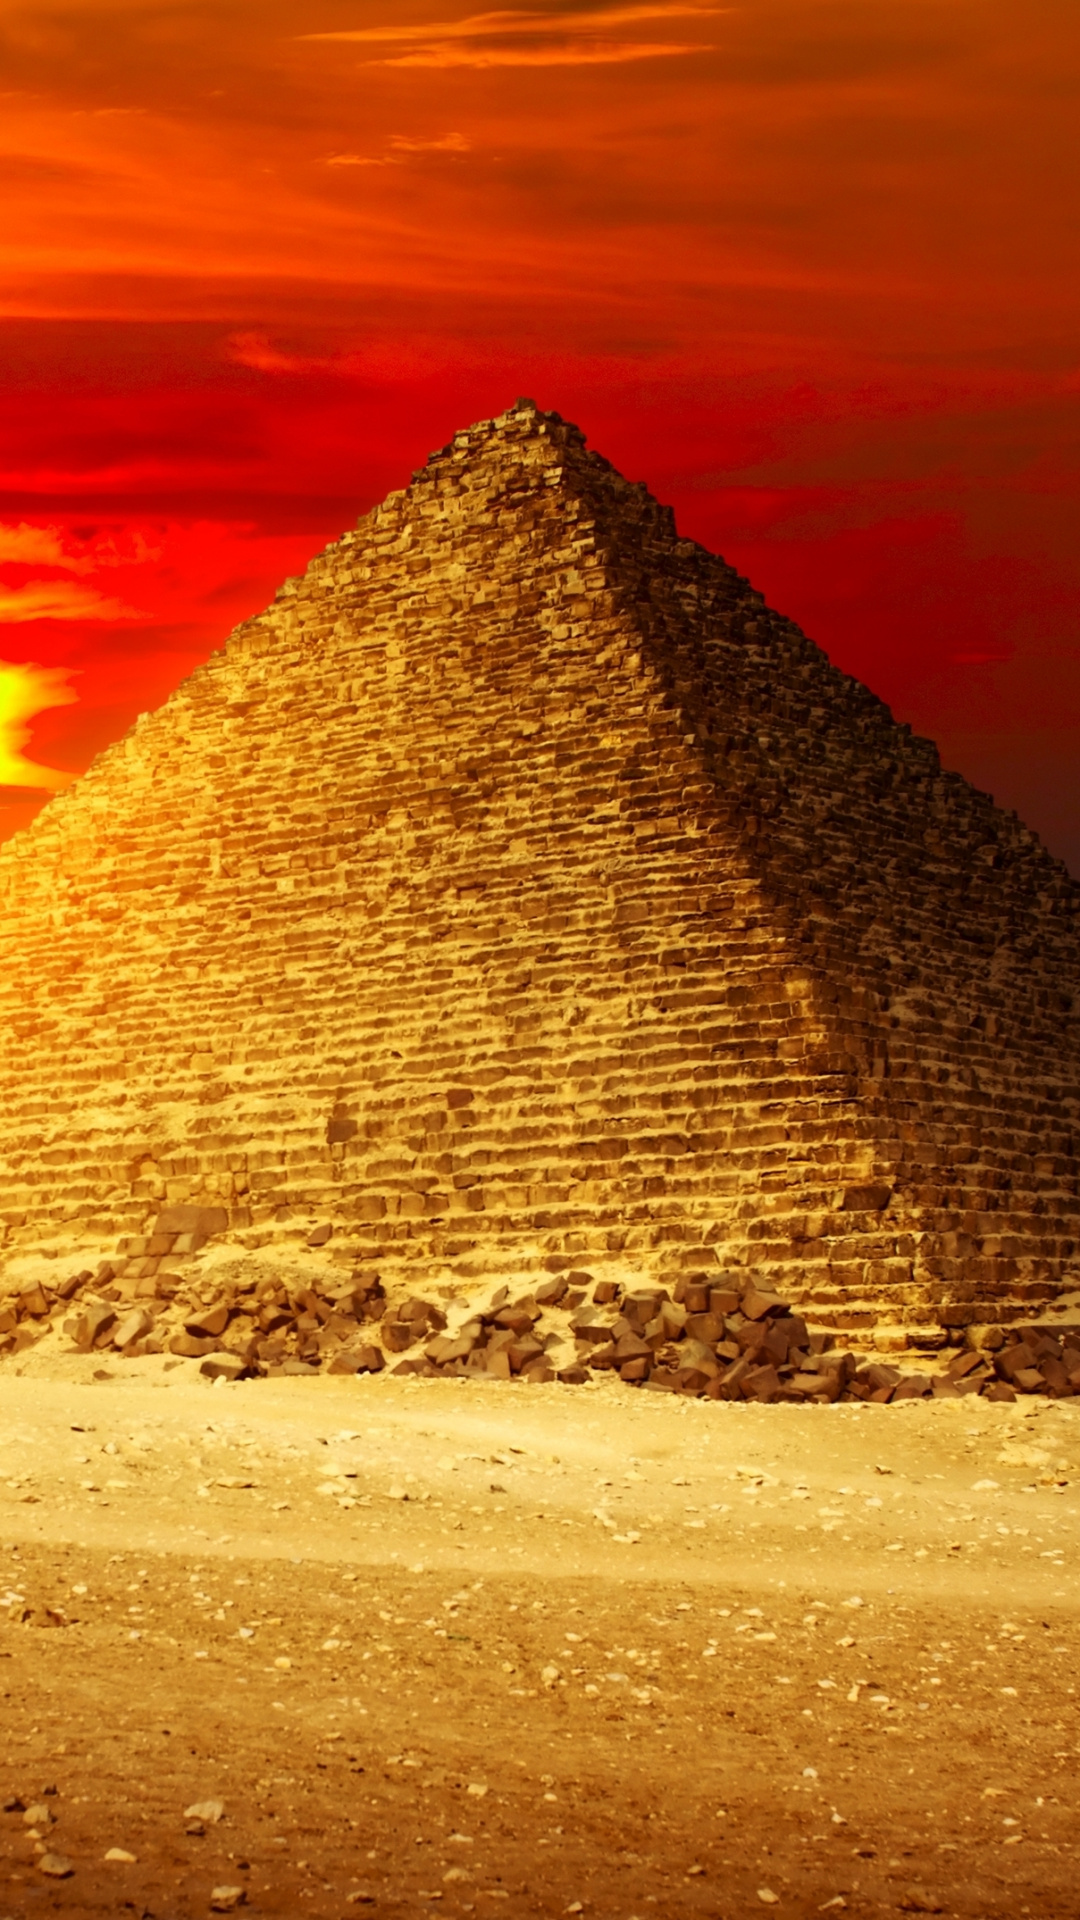 Monument, Sunset, Great Pyramid Of Giza, Sky, Cairo - Sunset Landscape Images Hd , HD Wallpaper & Backgrounds